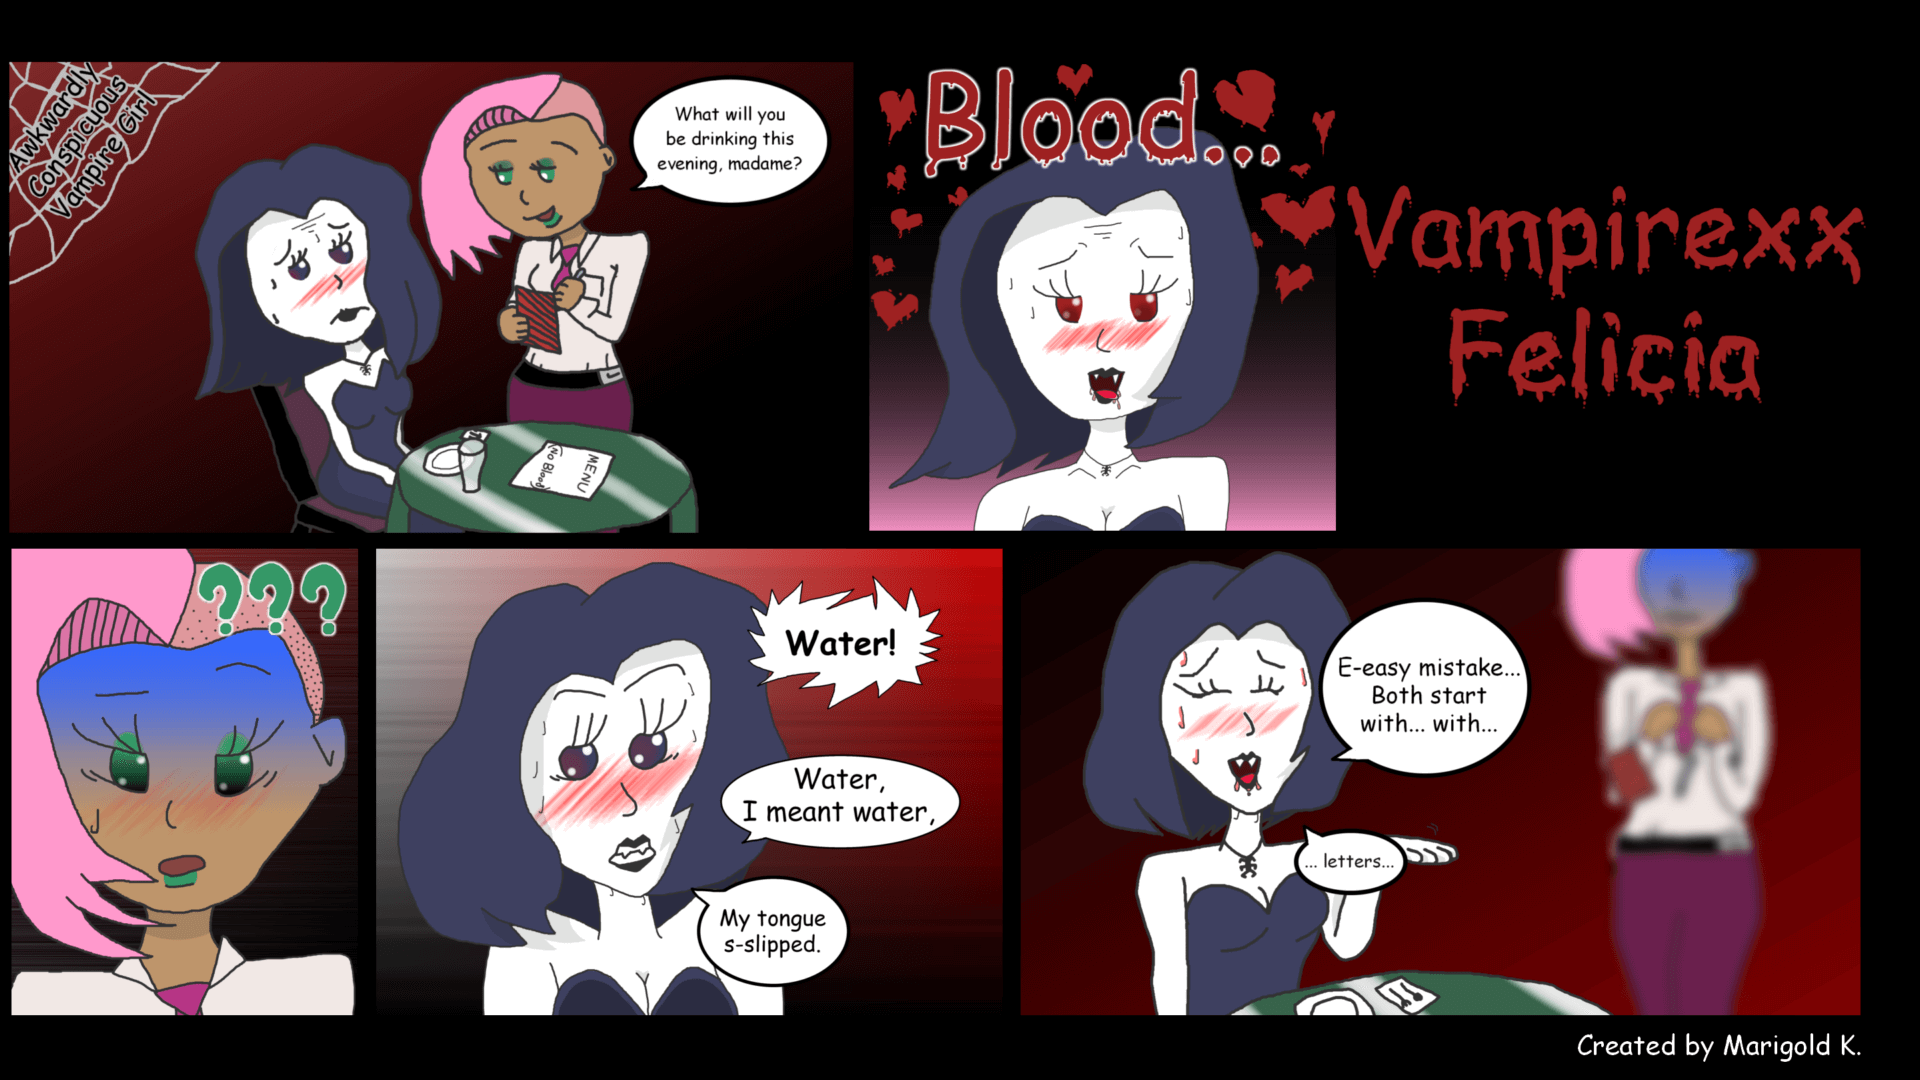 A 5-panel comic featuring a non-binary gal vampire who is very bad at being discreet. Click through to its dedicated webpage for a more detailed description.